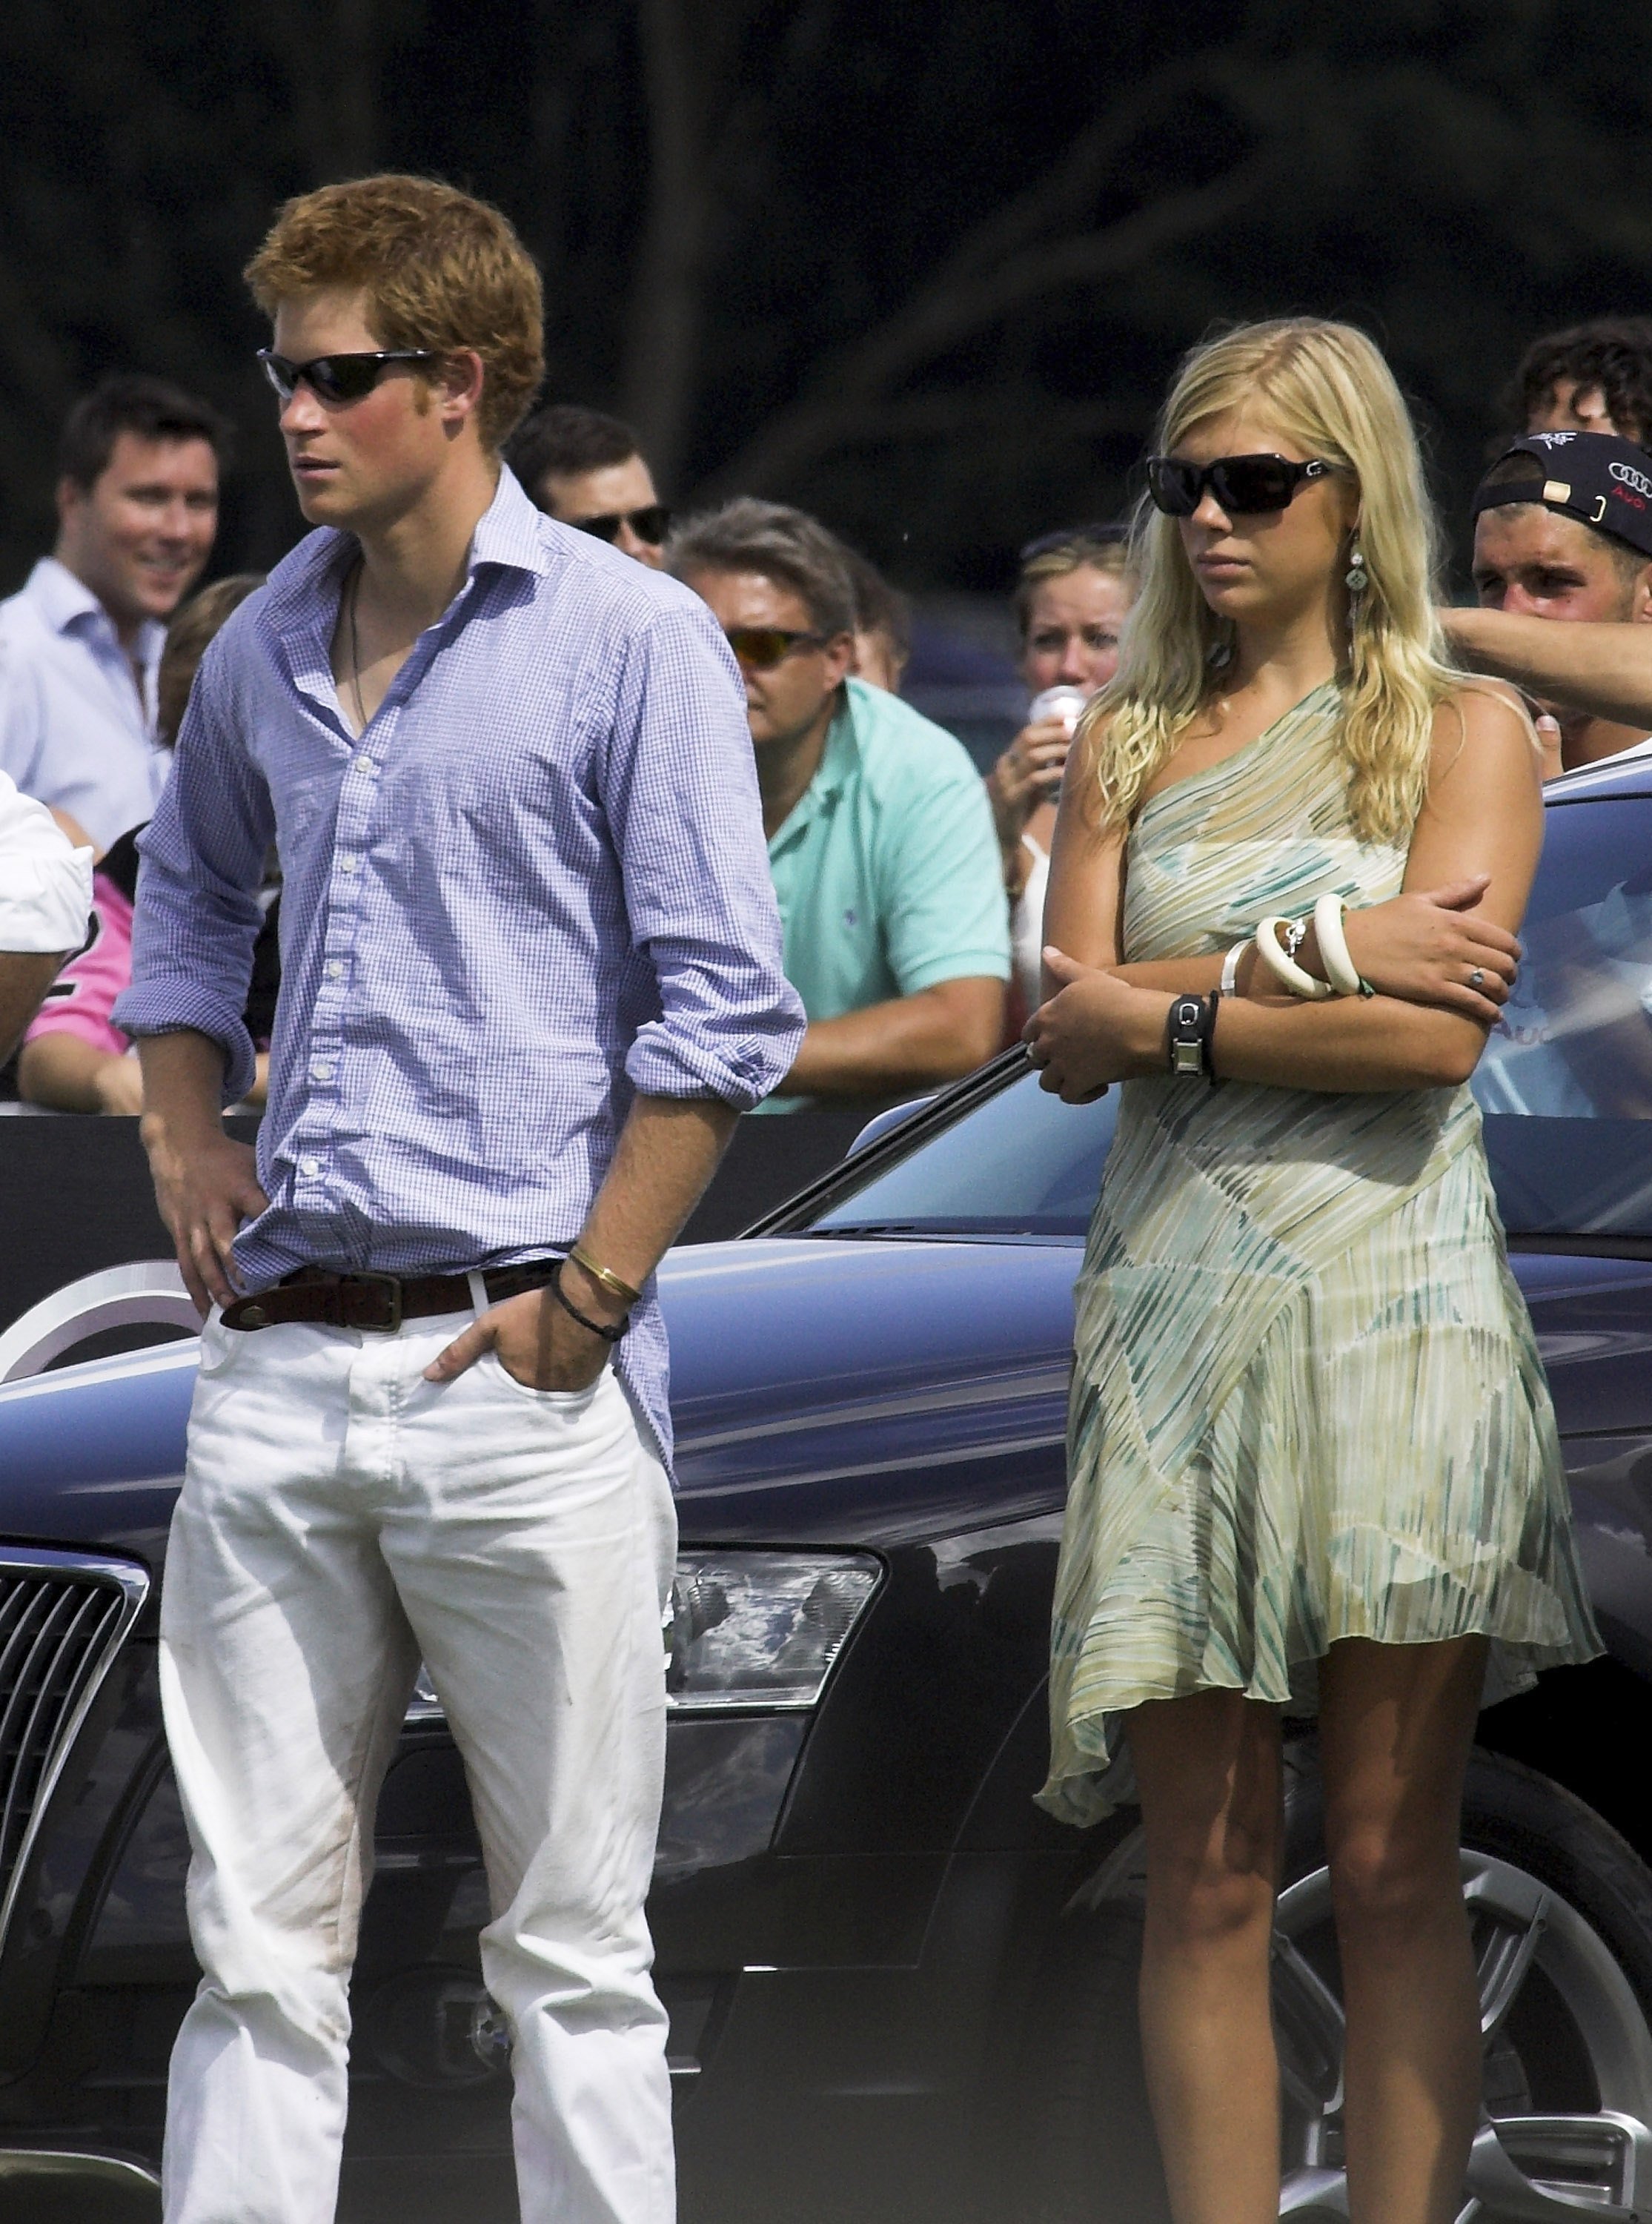 Prince Harry with his ex-girlfriend, Chelsy Davy. | Source: Getty Images